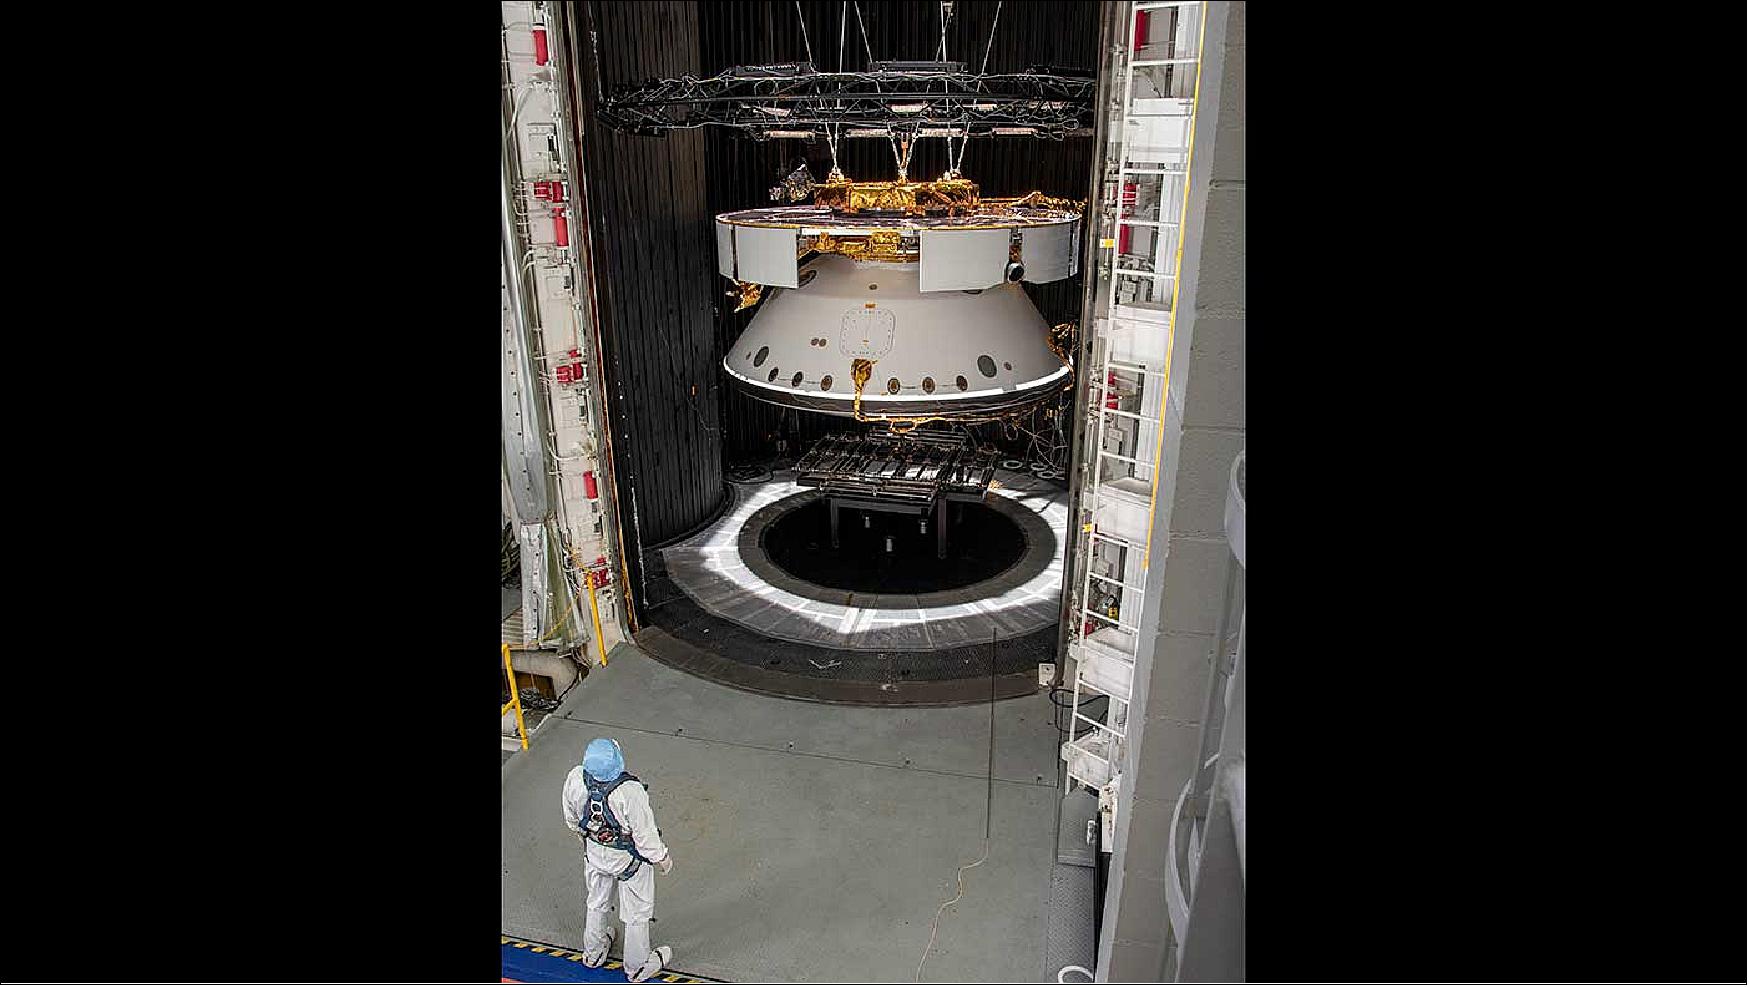 Figure 11: An engineer inspects the completed spacecraft that will carry NASA's next Mars rover to the Red Planet, prior to a test in the Space Simulator Facility at NASA/JPL (image credit: NASA/JPL, Caltech)